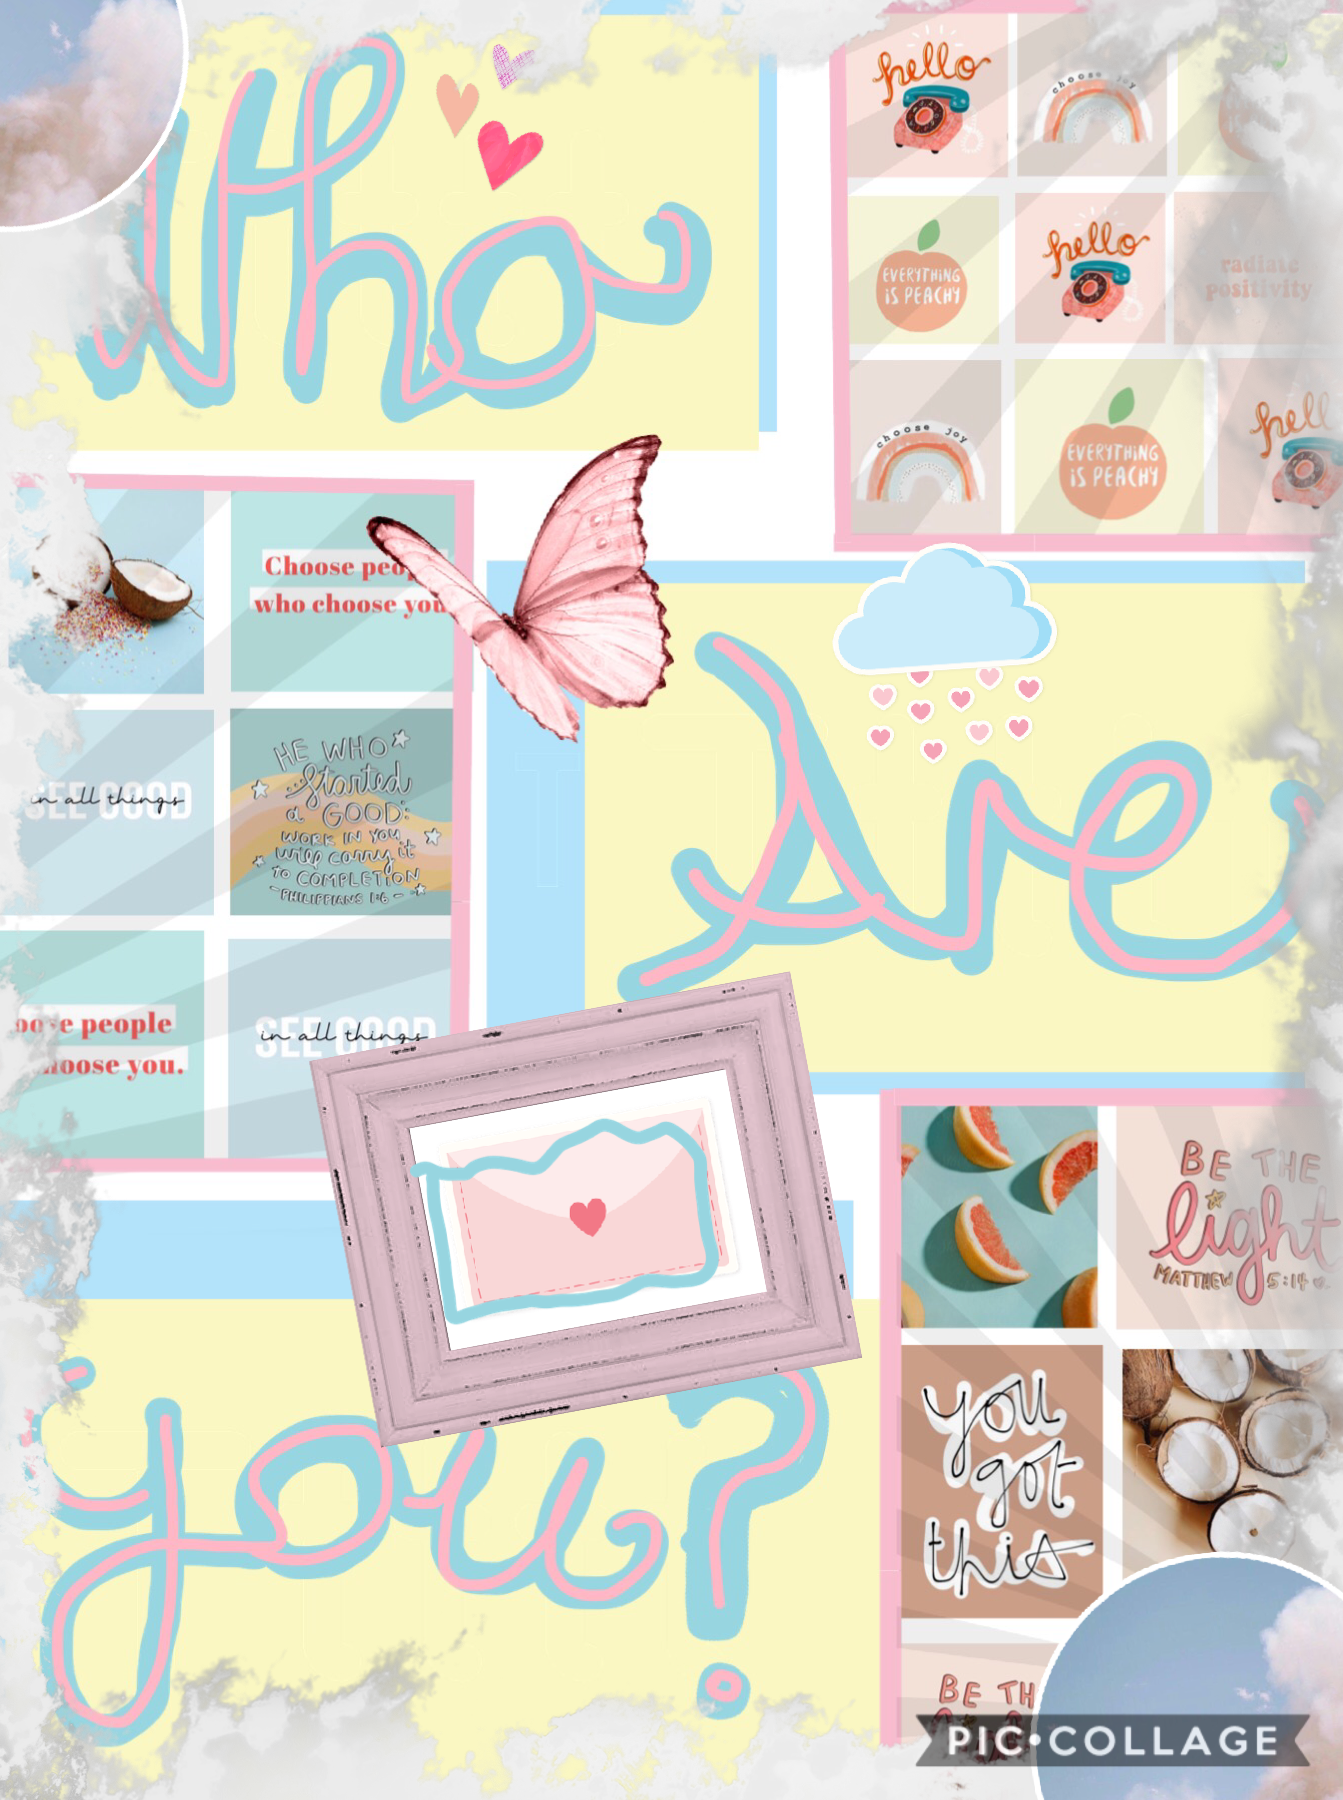 💕happy Valentine’s! (tap)💕
This is a really childish collage, but it’s a new style that I’ve never seen before, and had to come up with, so it was extremely hard. Can I just say the pc stickers actually can look really good!!Hope you have a lovely day!! 